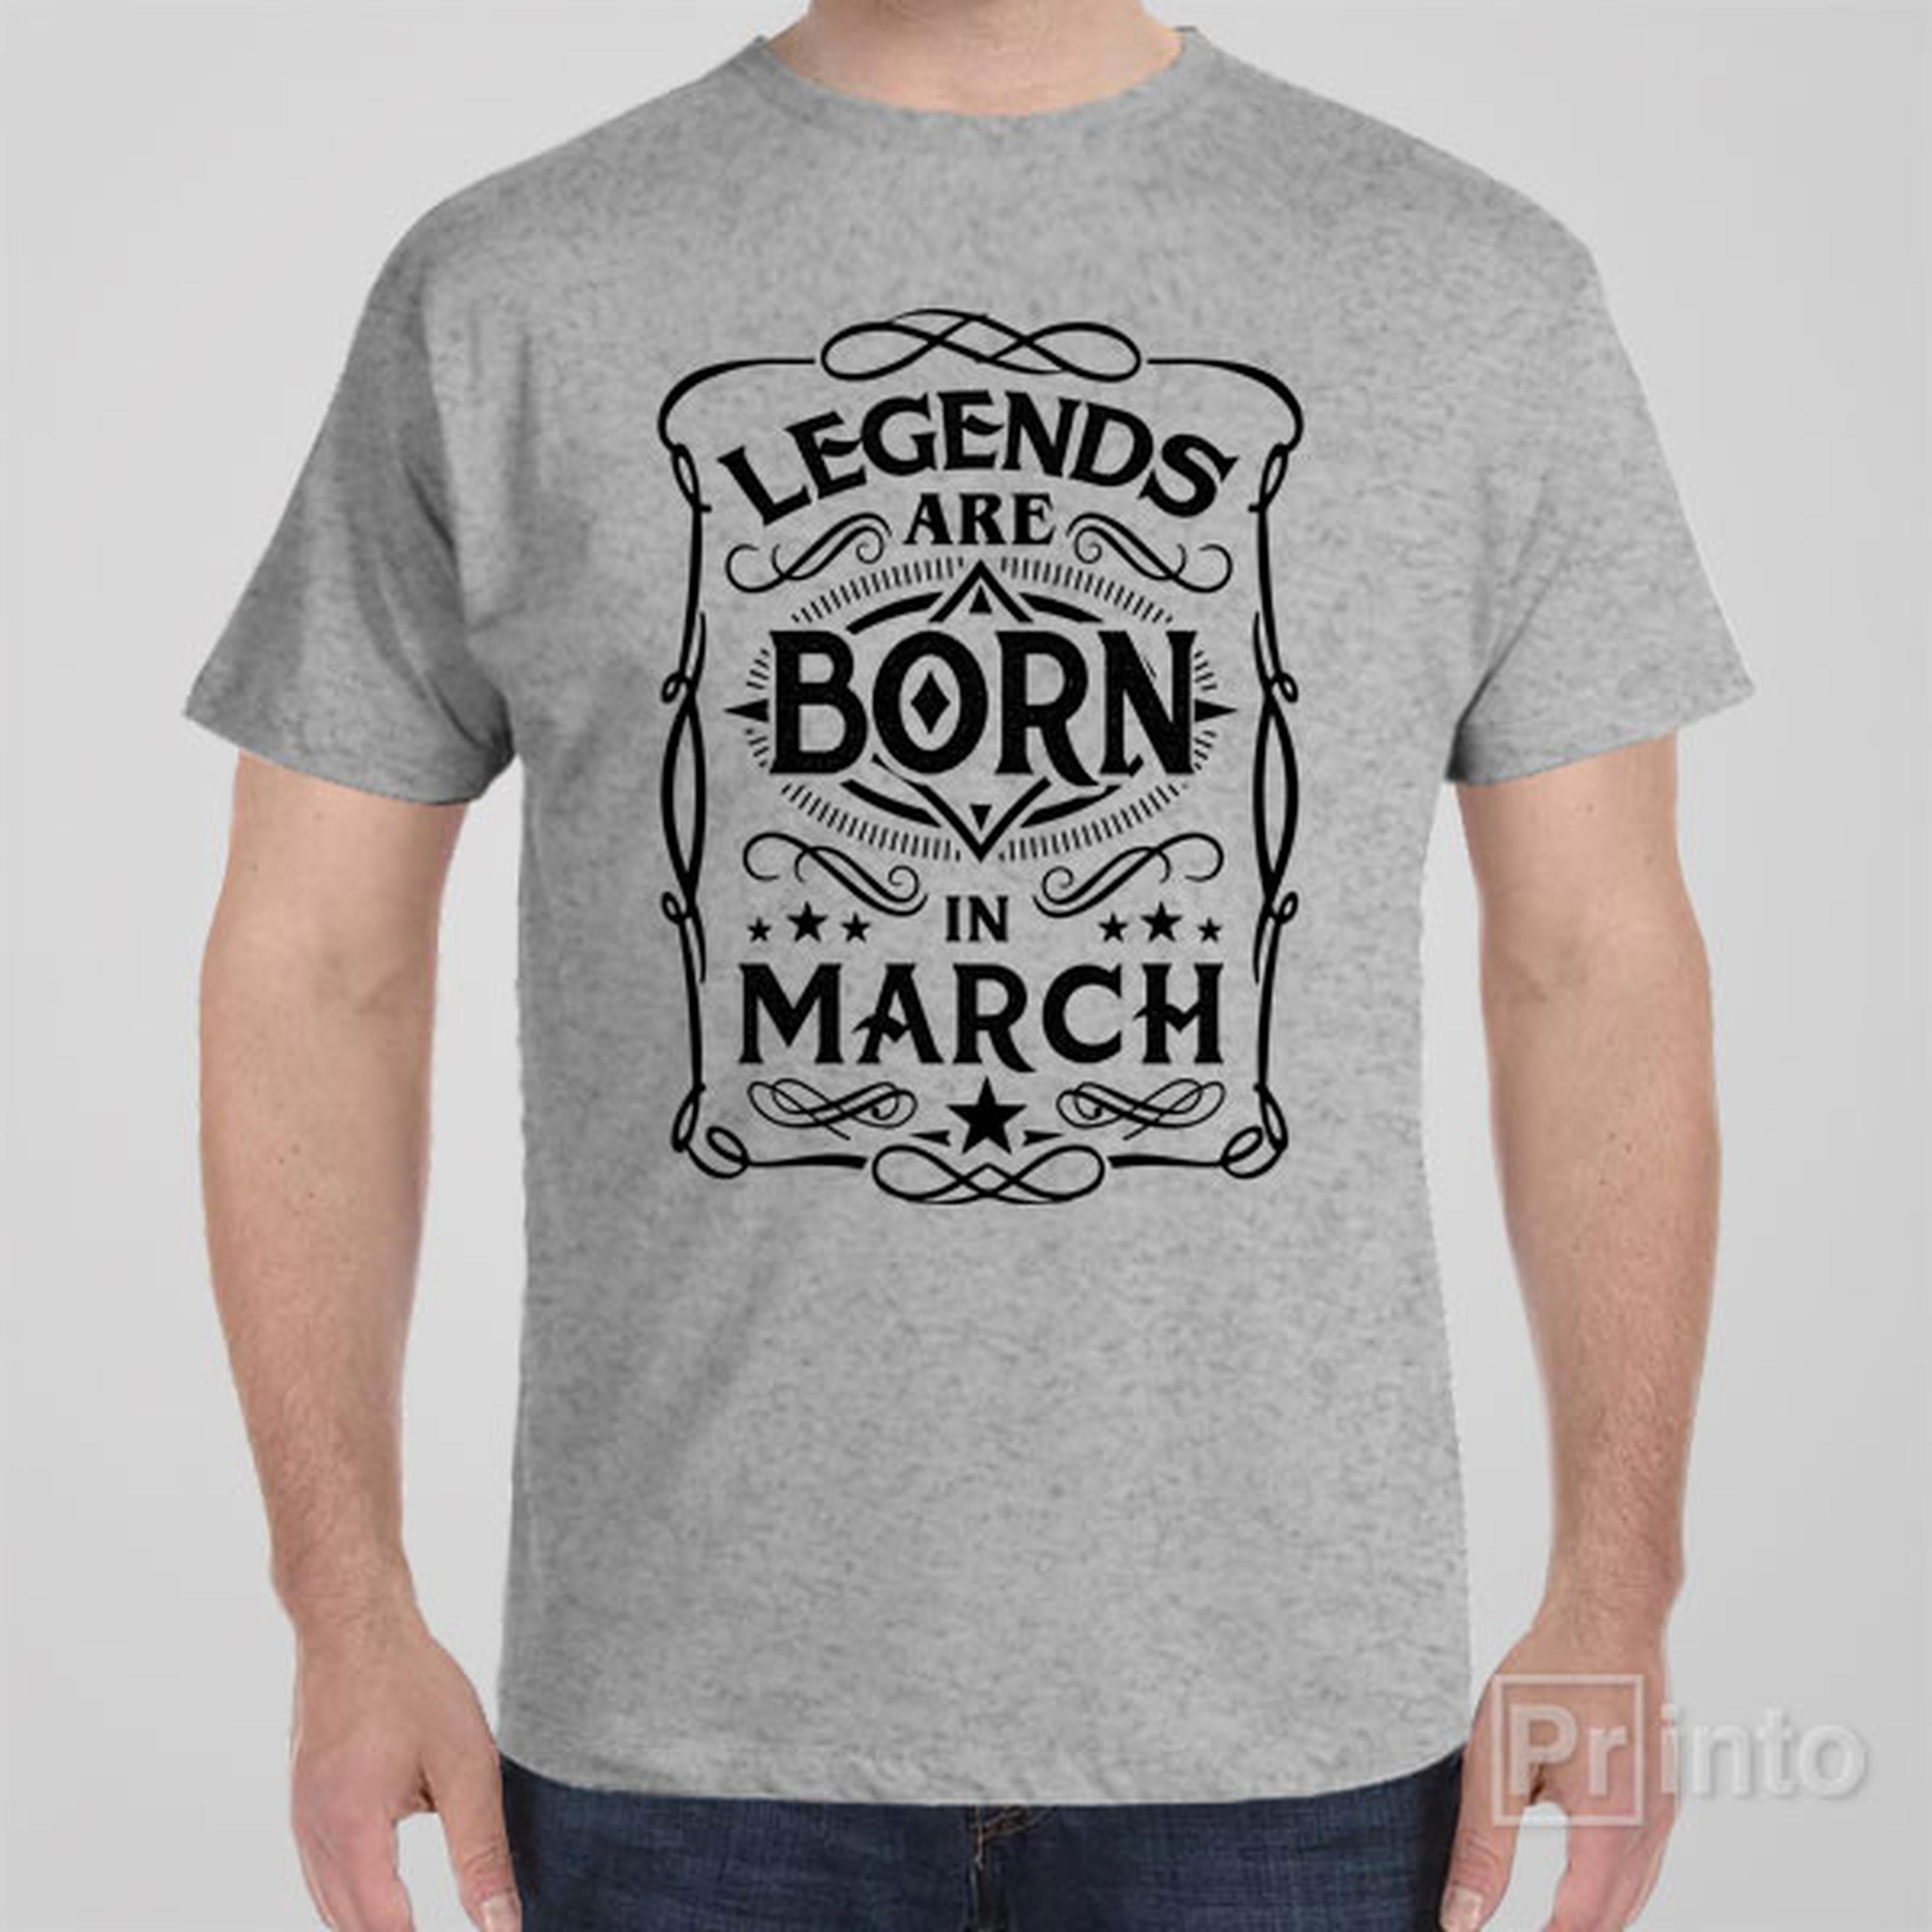 legends-are-born-in-march-t-shirt